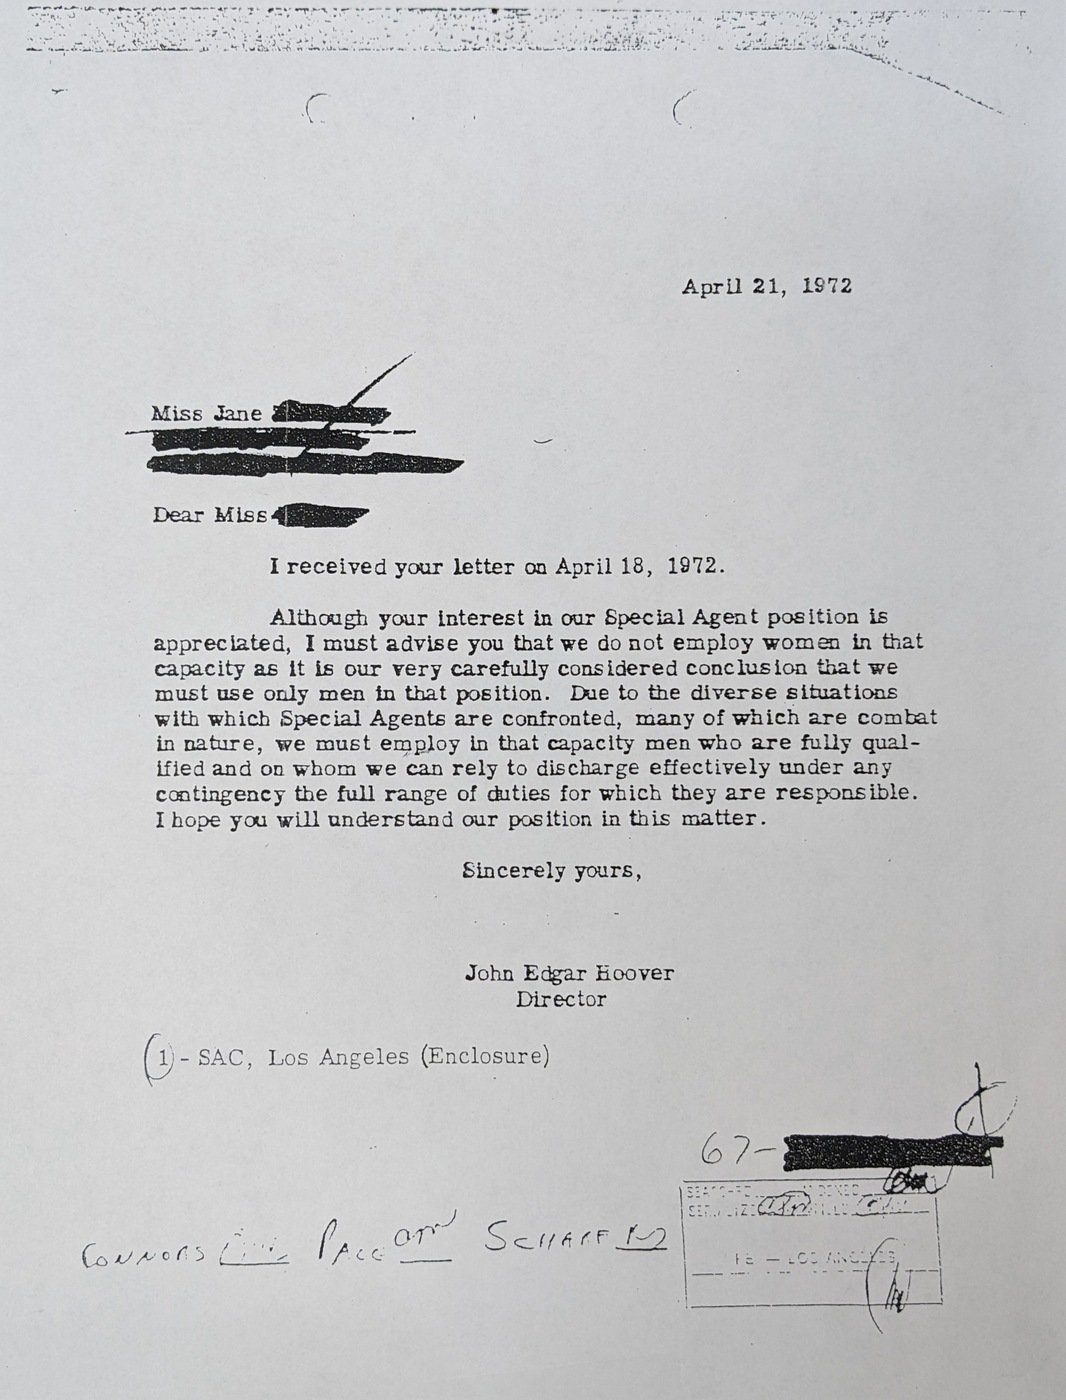 A letter from then-FBI Director J. Edgar Hoover to a female special agent applicant, identified as Jane. The letter reads: 
I received your letter on April 18, 1972. Although your interest in our Special Agent position is appreciated, I must advise you that we do not employ women in that capacity as it is our very carefully considered conclusion that we must use only men in that position. Due to the diverse situations with which Special Agents are confronted, many of which are combat in nature, we must employ in that capacity men who are fully qualified and on whom we can rely to discharge effectively under any contingency the full range of duties for which they are responsible. I hope you will understand our position in this matter.